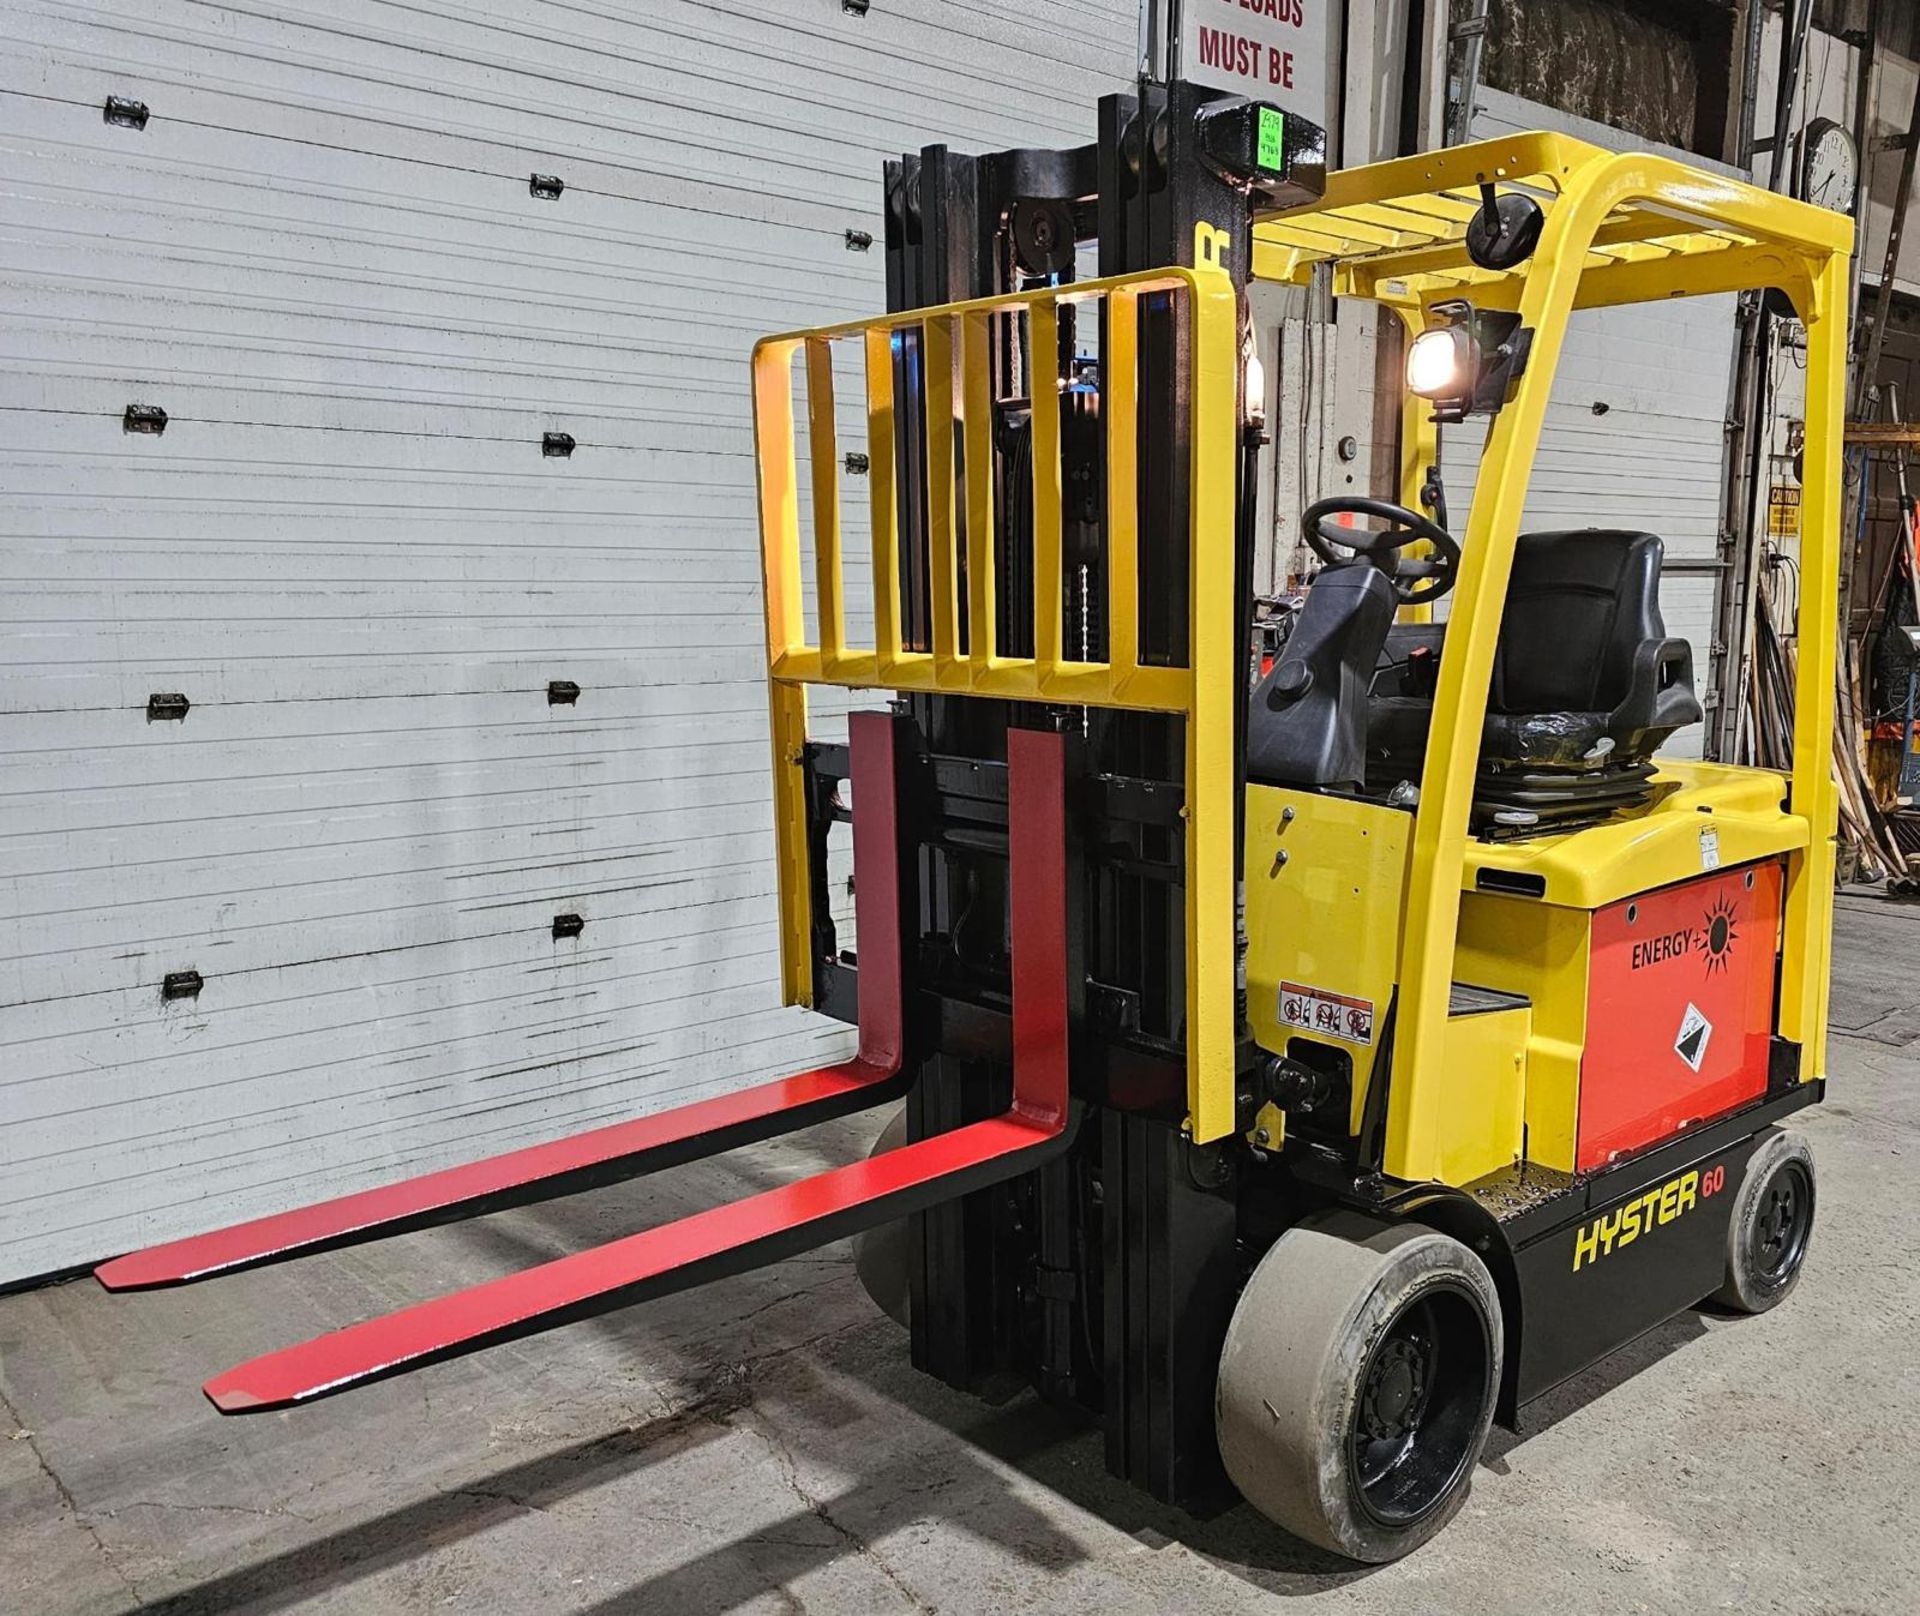 2015 Hyster 5,000lbs Capacity LPG (Propane) Forklift with sideshift & 3-STAGE MAST & Non marking - Image 2 of 3